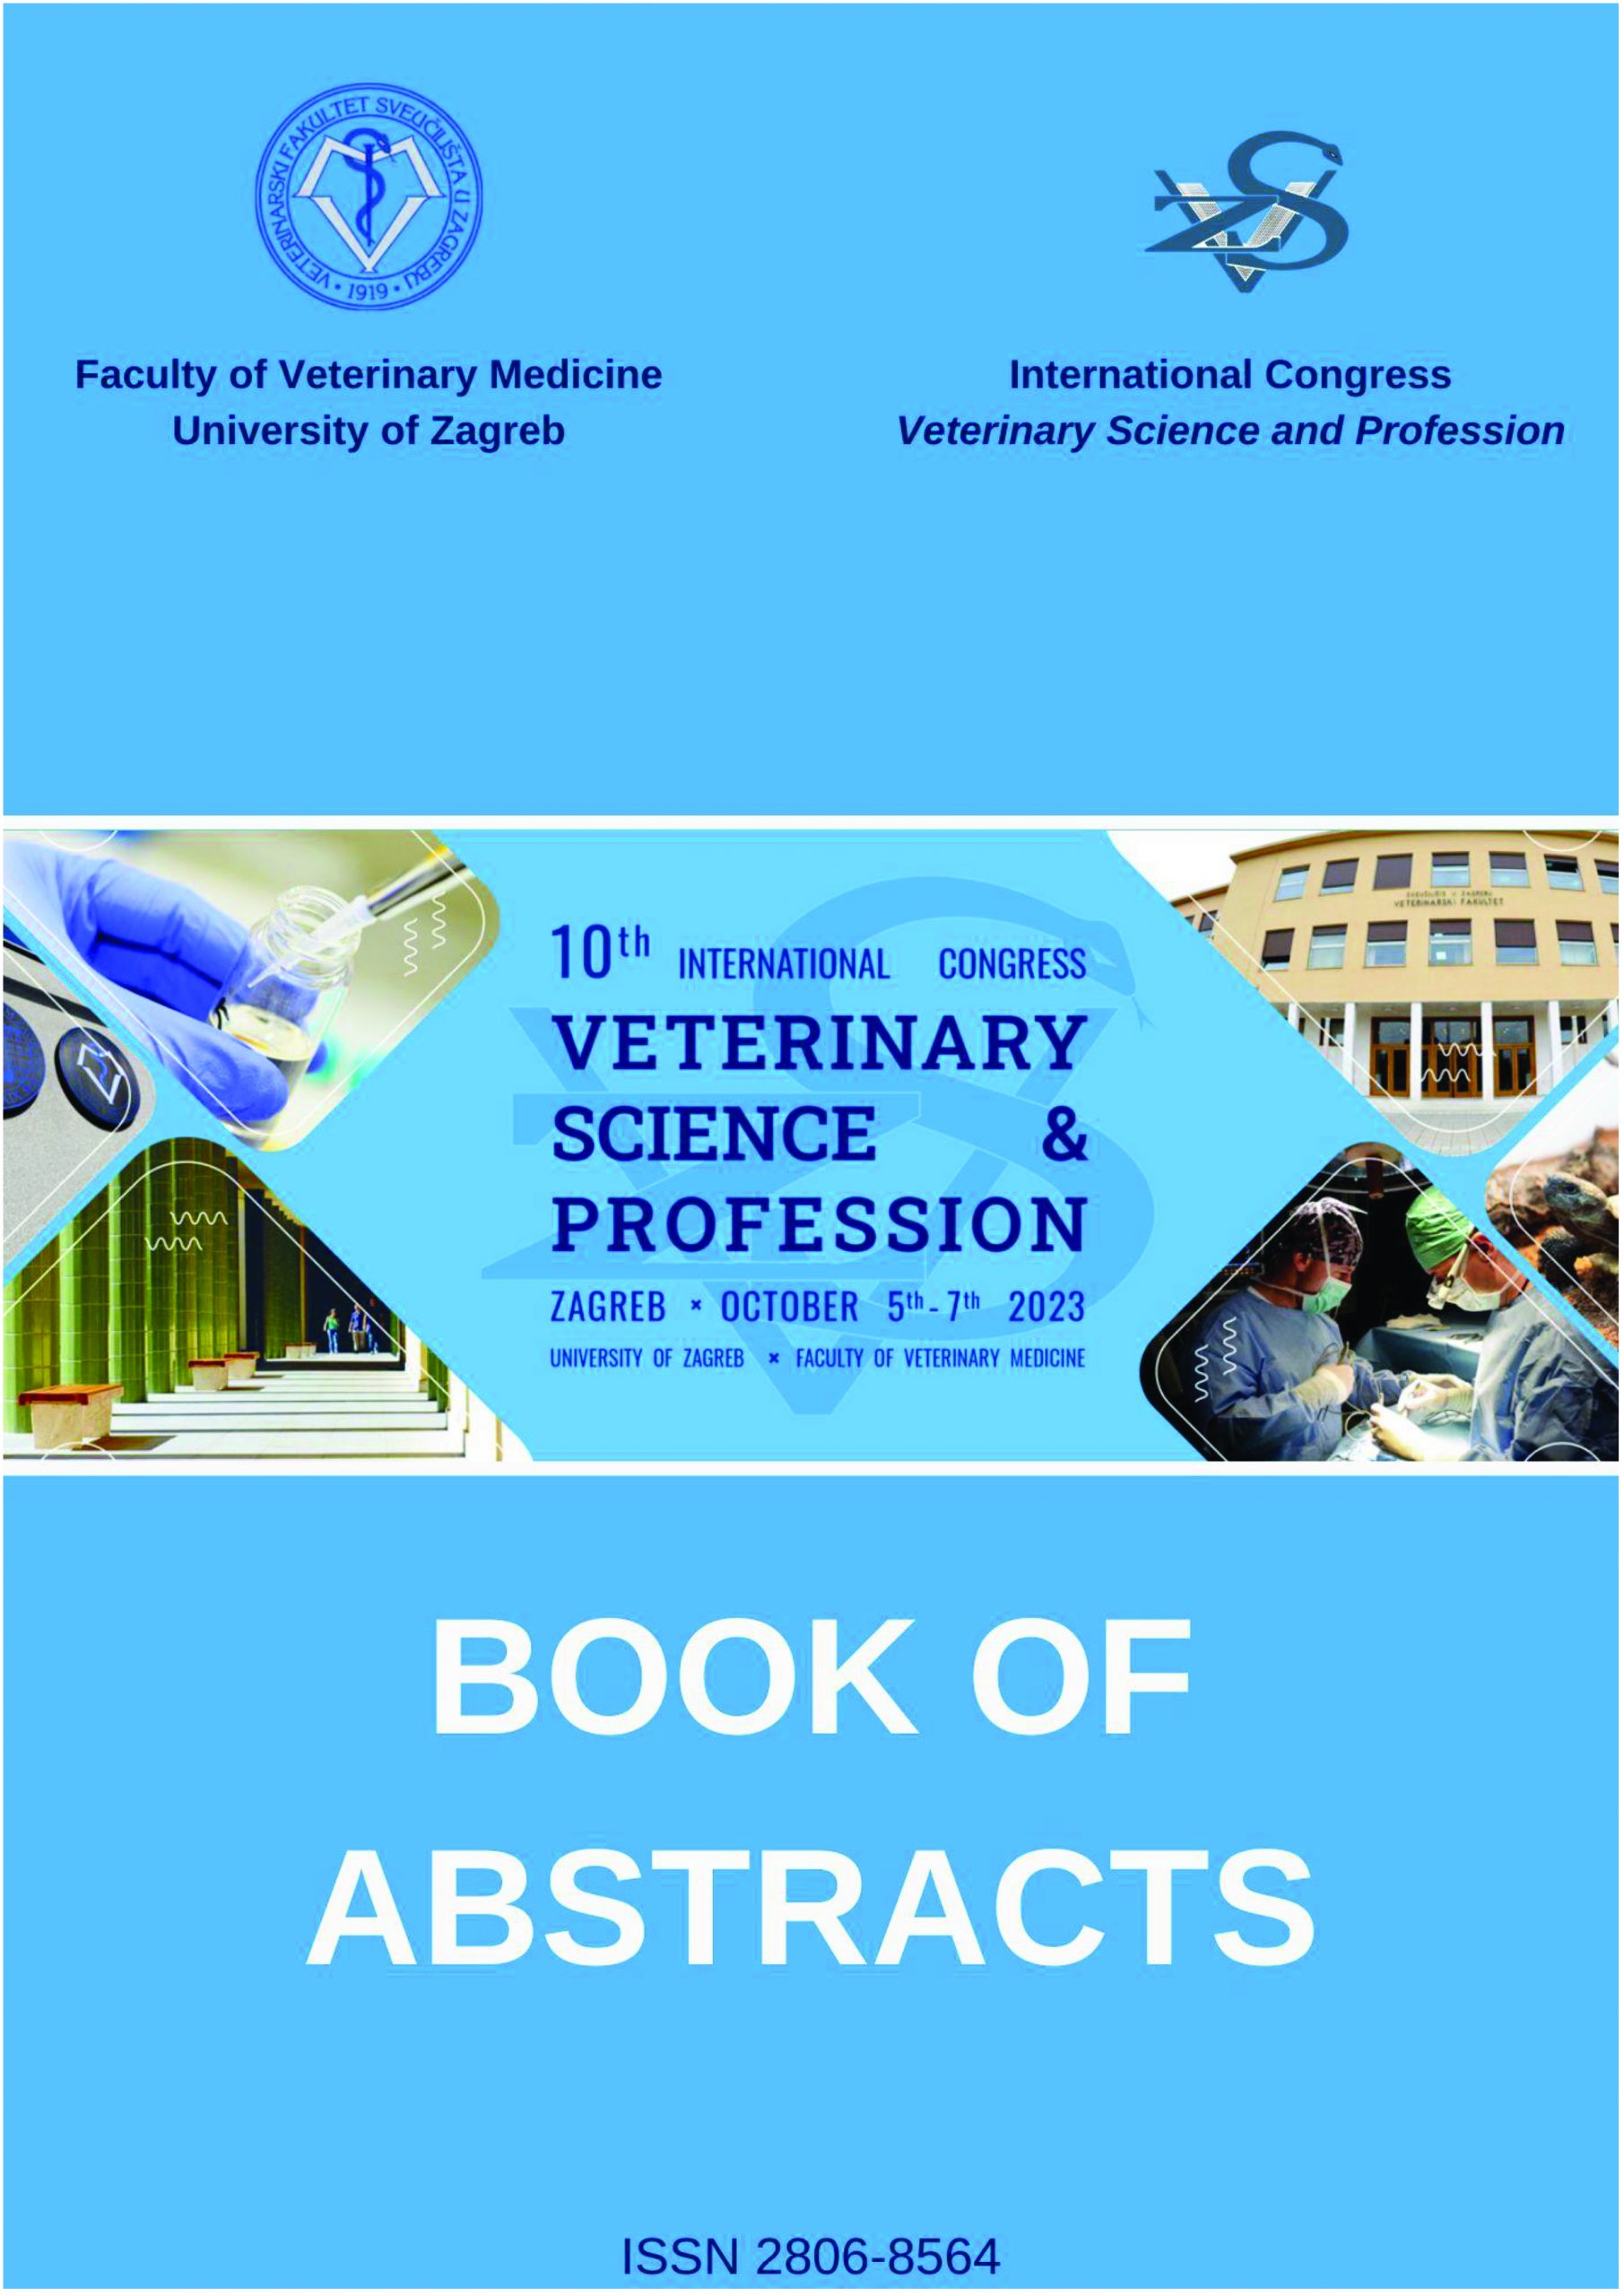 Book of abstracts of 10th international congress “Veterinary science and profession”